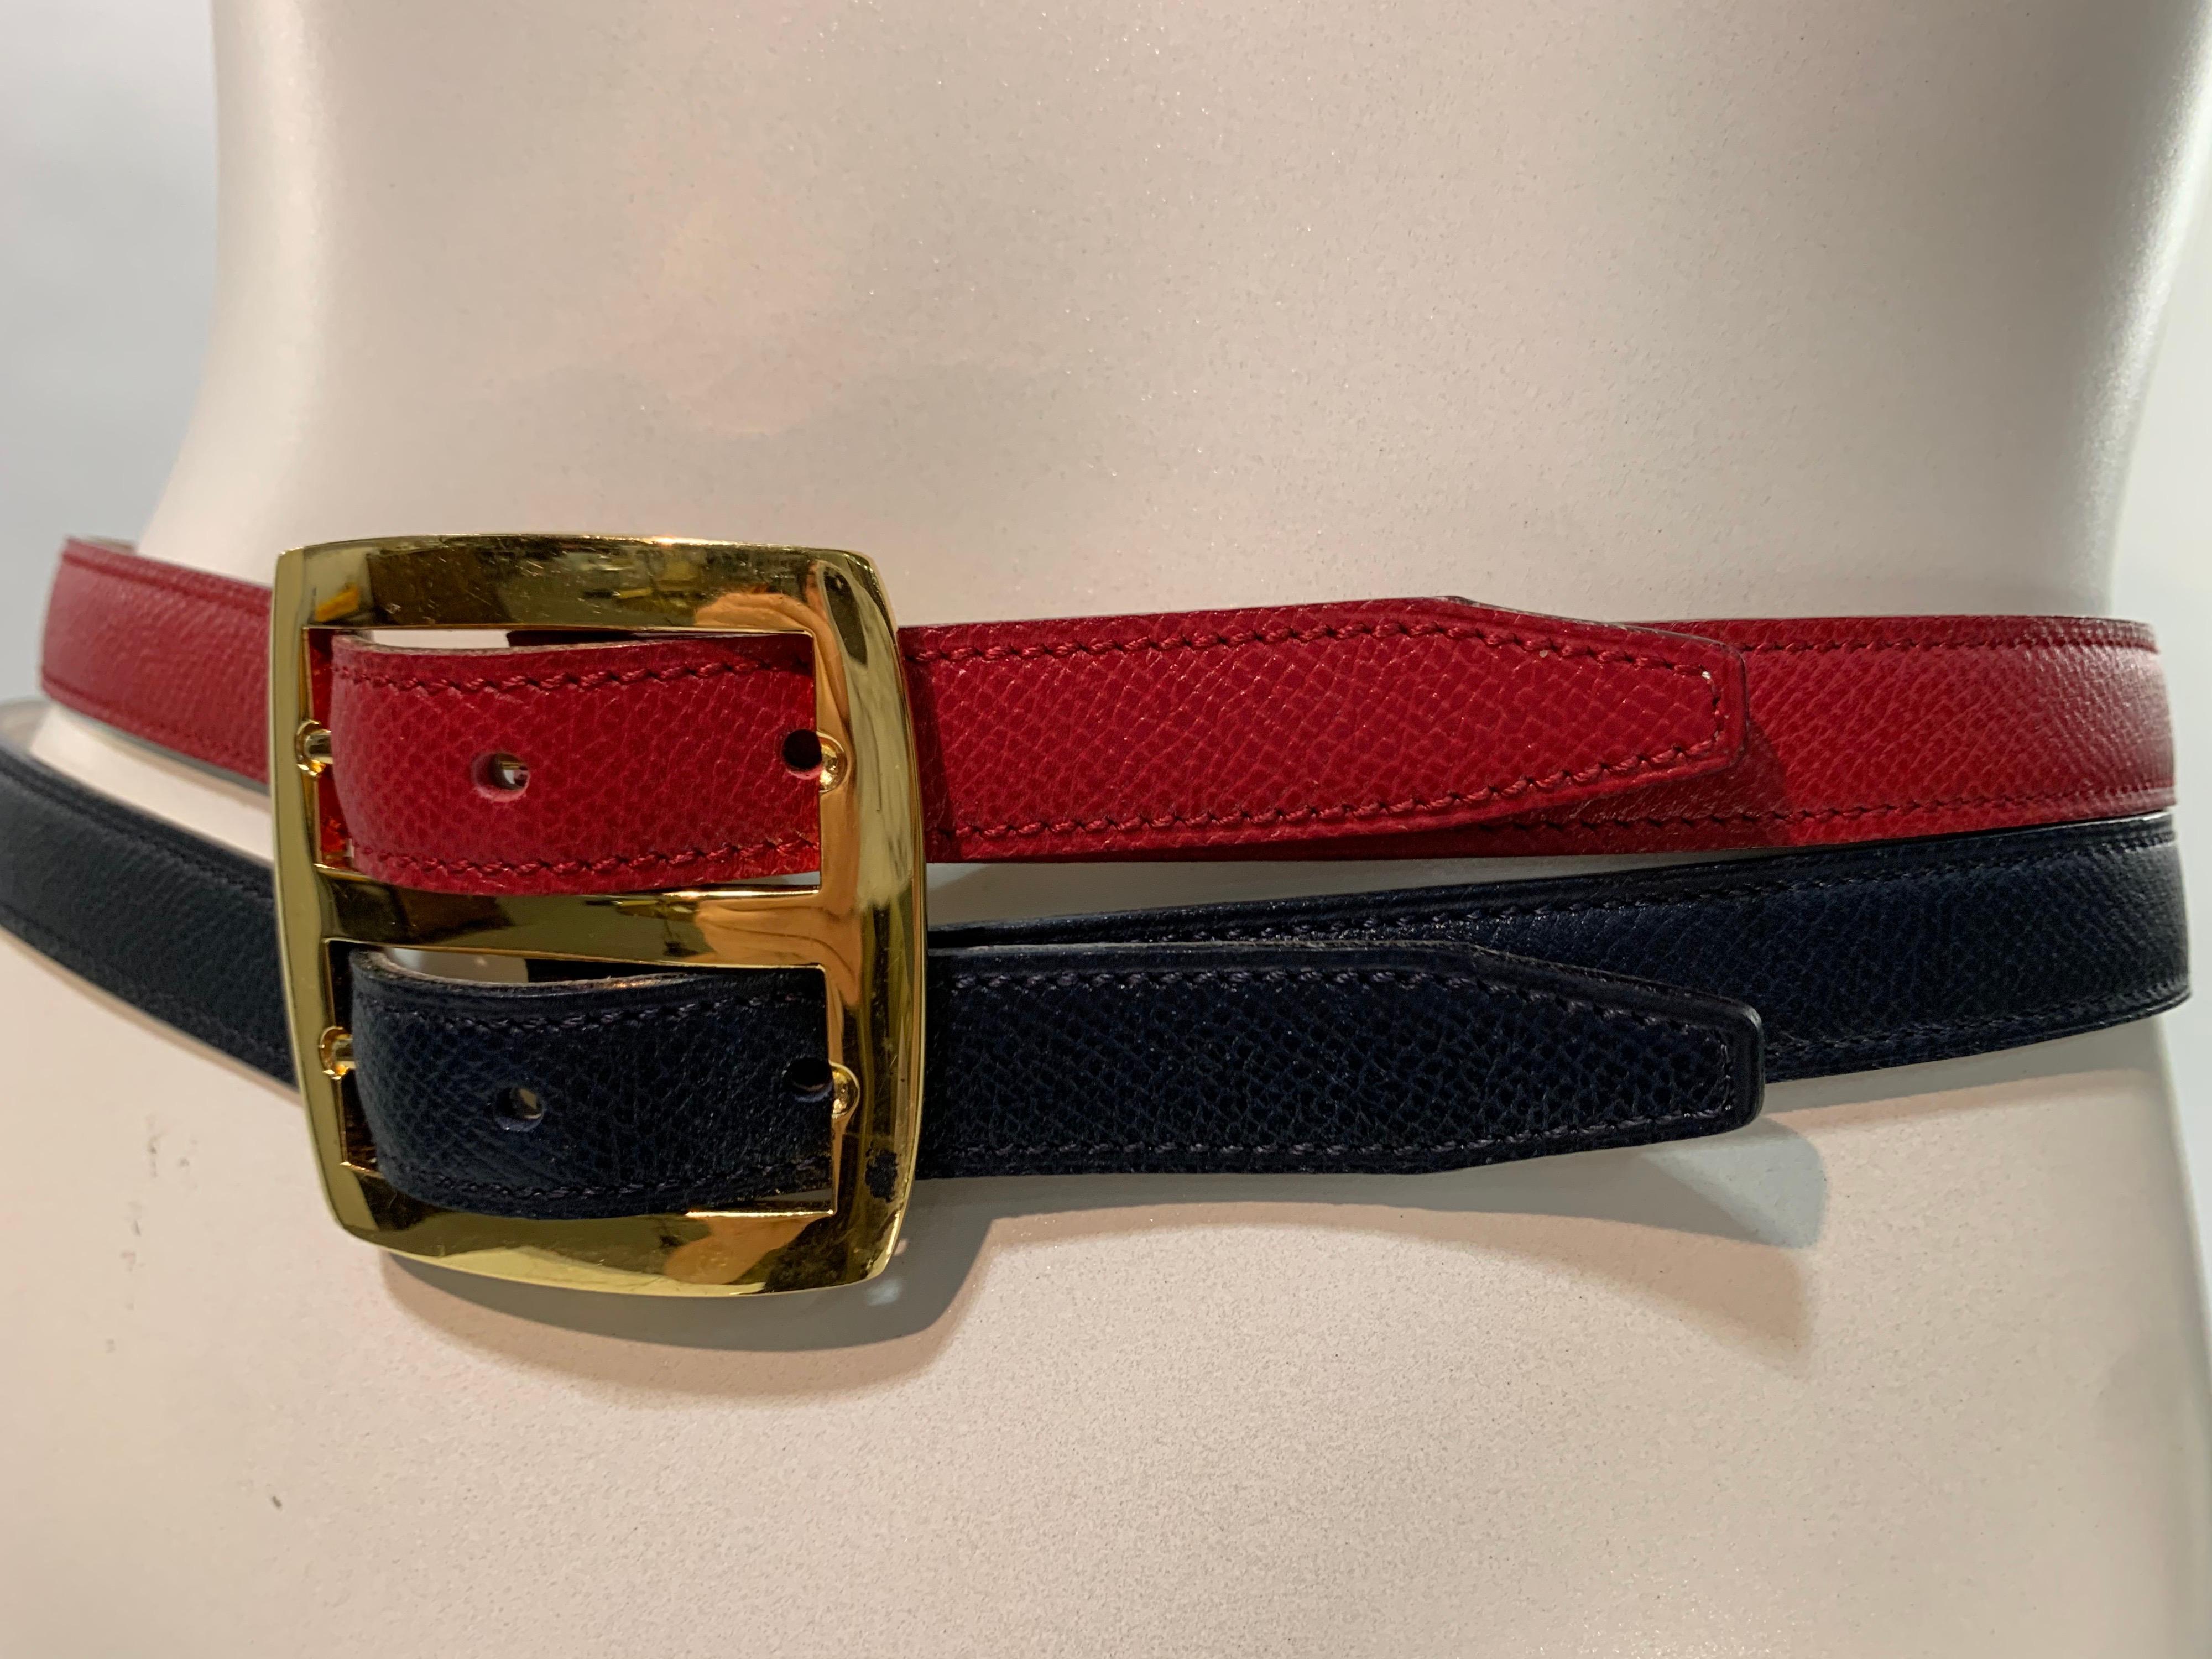 A fabulously useful and versatile 1980s Hermes reversible double leather belt: one side is a stamped lizard finish in Hermes' signature red and navy blue and the other is chestnut brown and white. Gold side-by-side double buckle. Size Small.